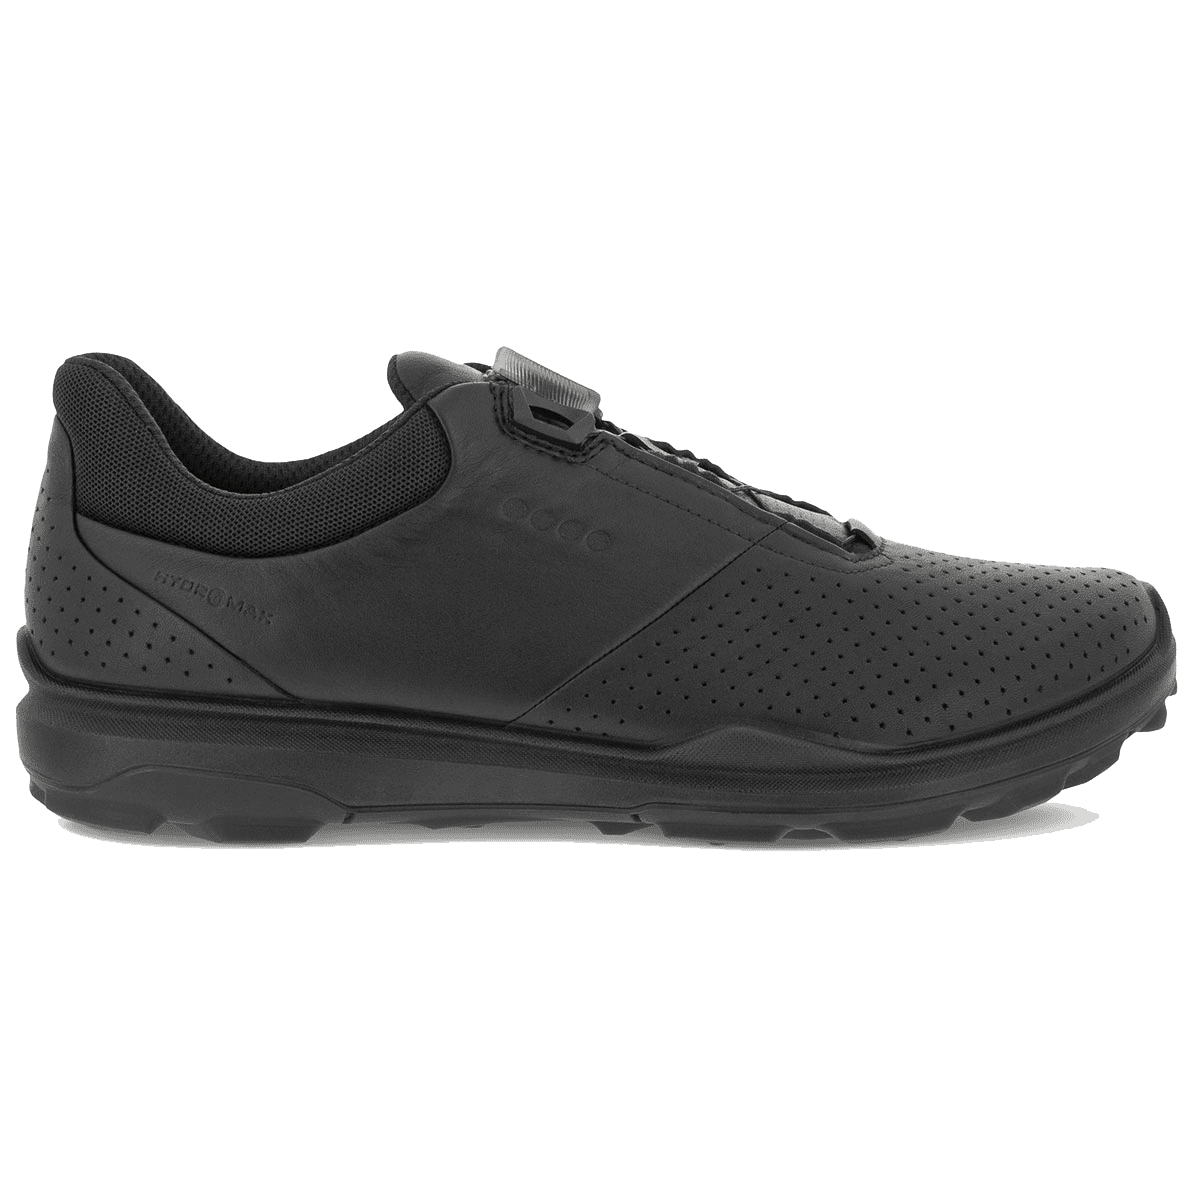 best ecco golf shoes for plantar fasciitis